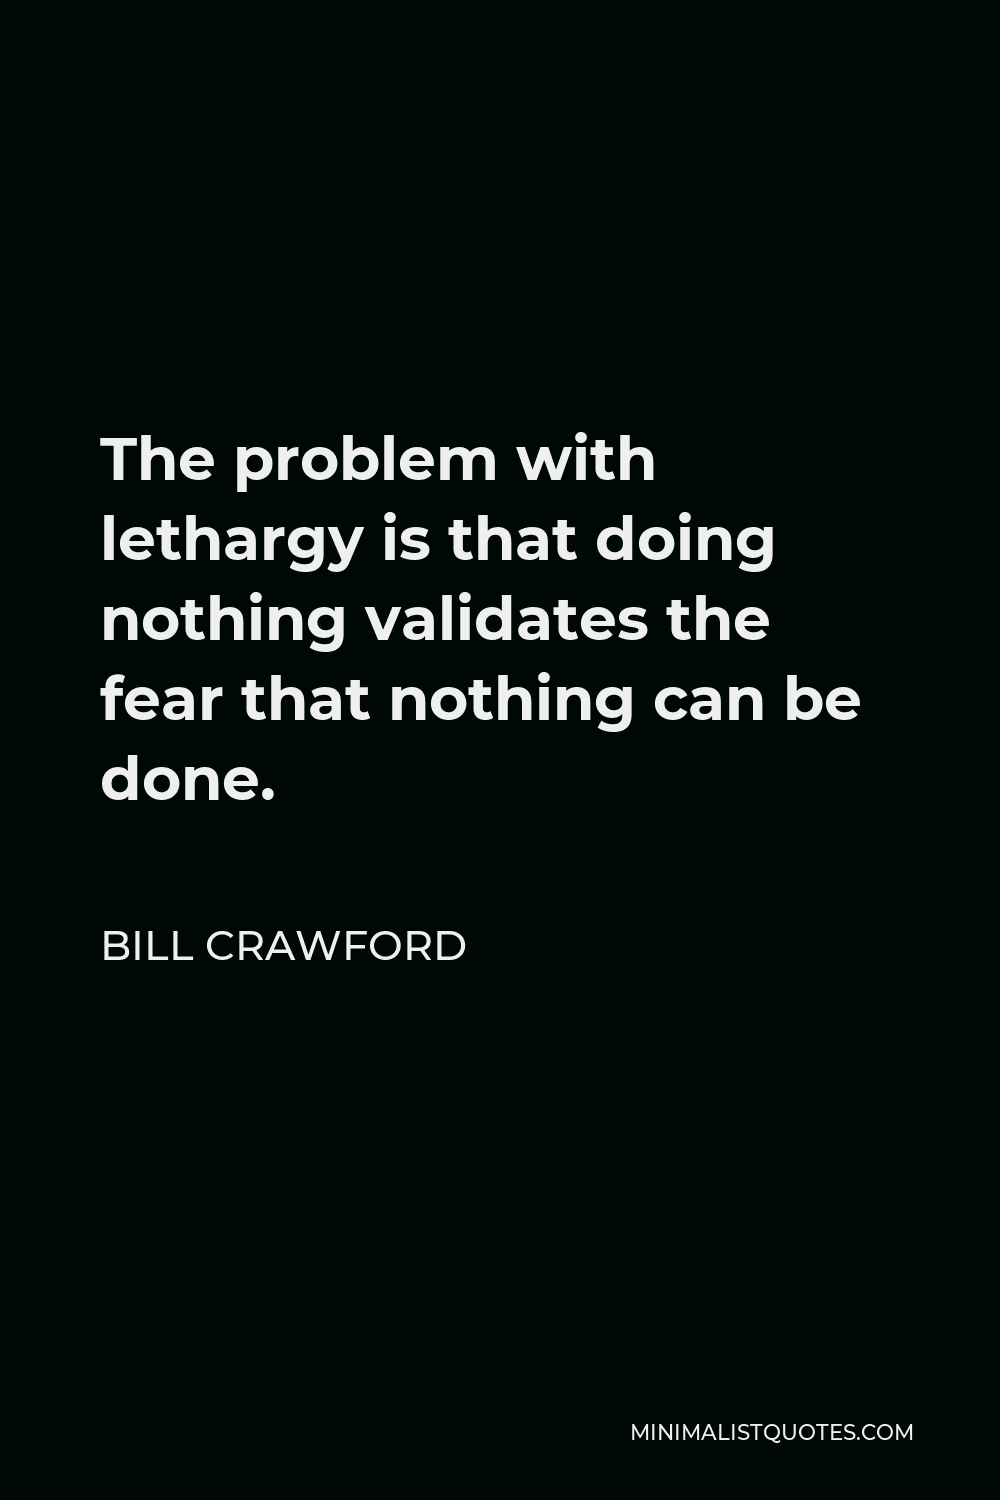 Bill Crawford Quote - The problem with lethargy is that doing nothing validates the fear that nothing can be done.